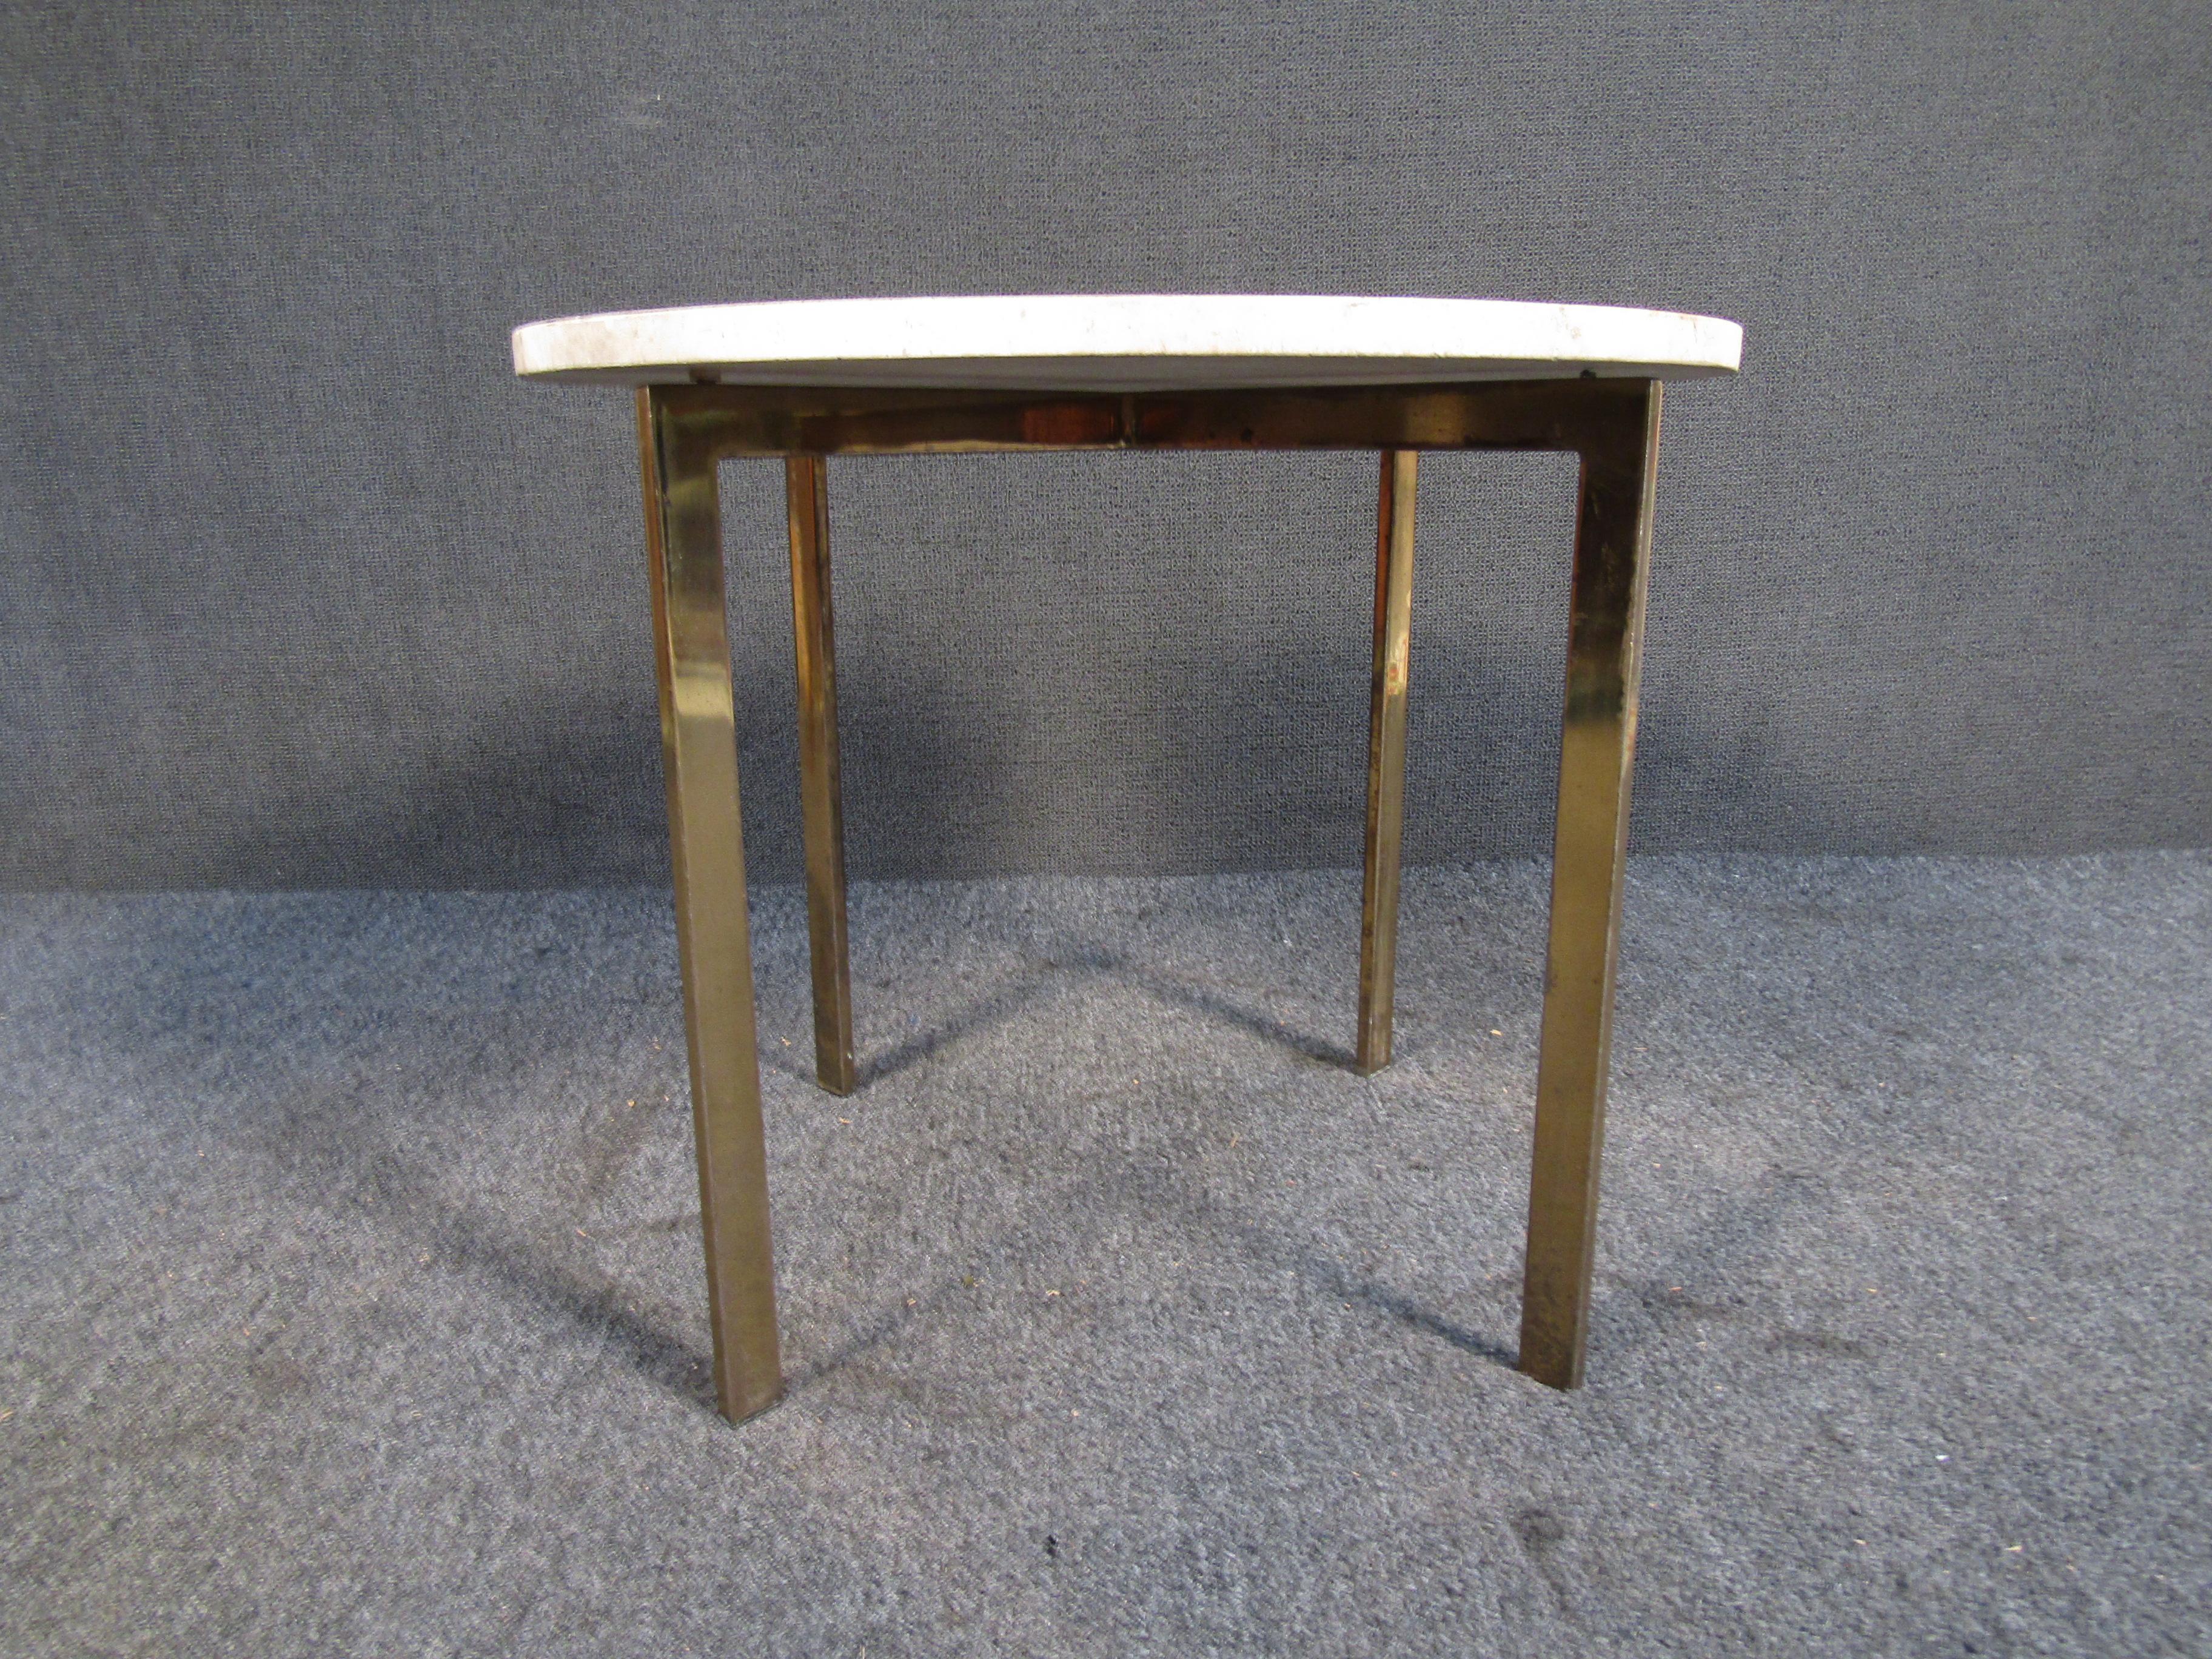 Pairing a rounded marble top with an elegant brass base, this vintage side table has eye-catching style anywhere it's placed. Please confirm item location with seller (NY/NJ).